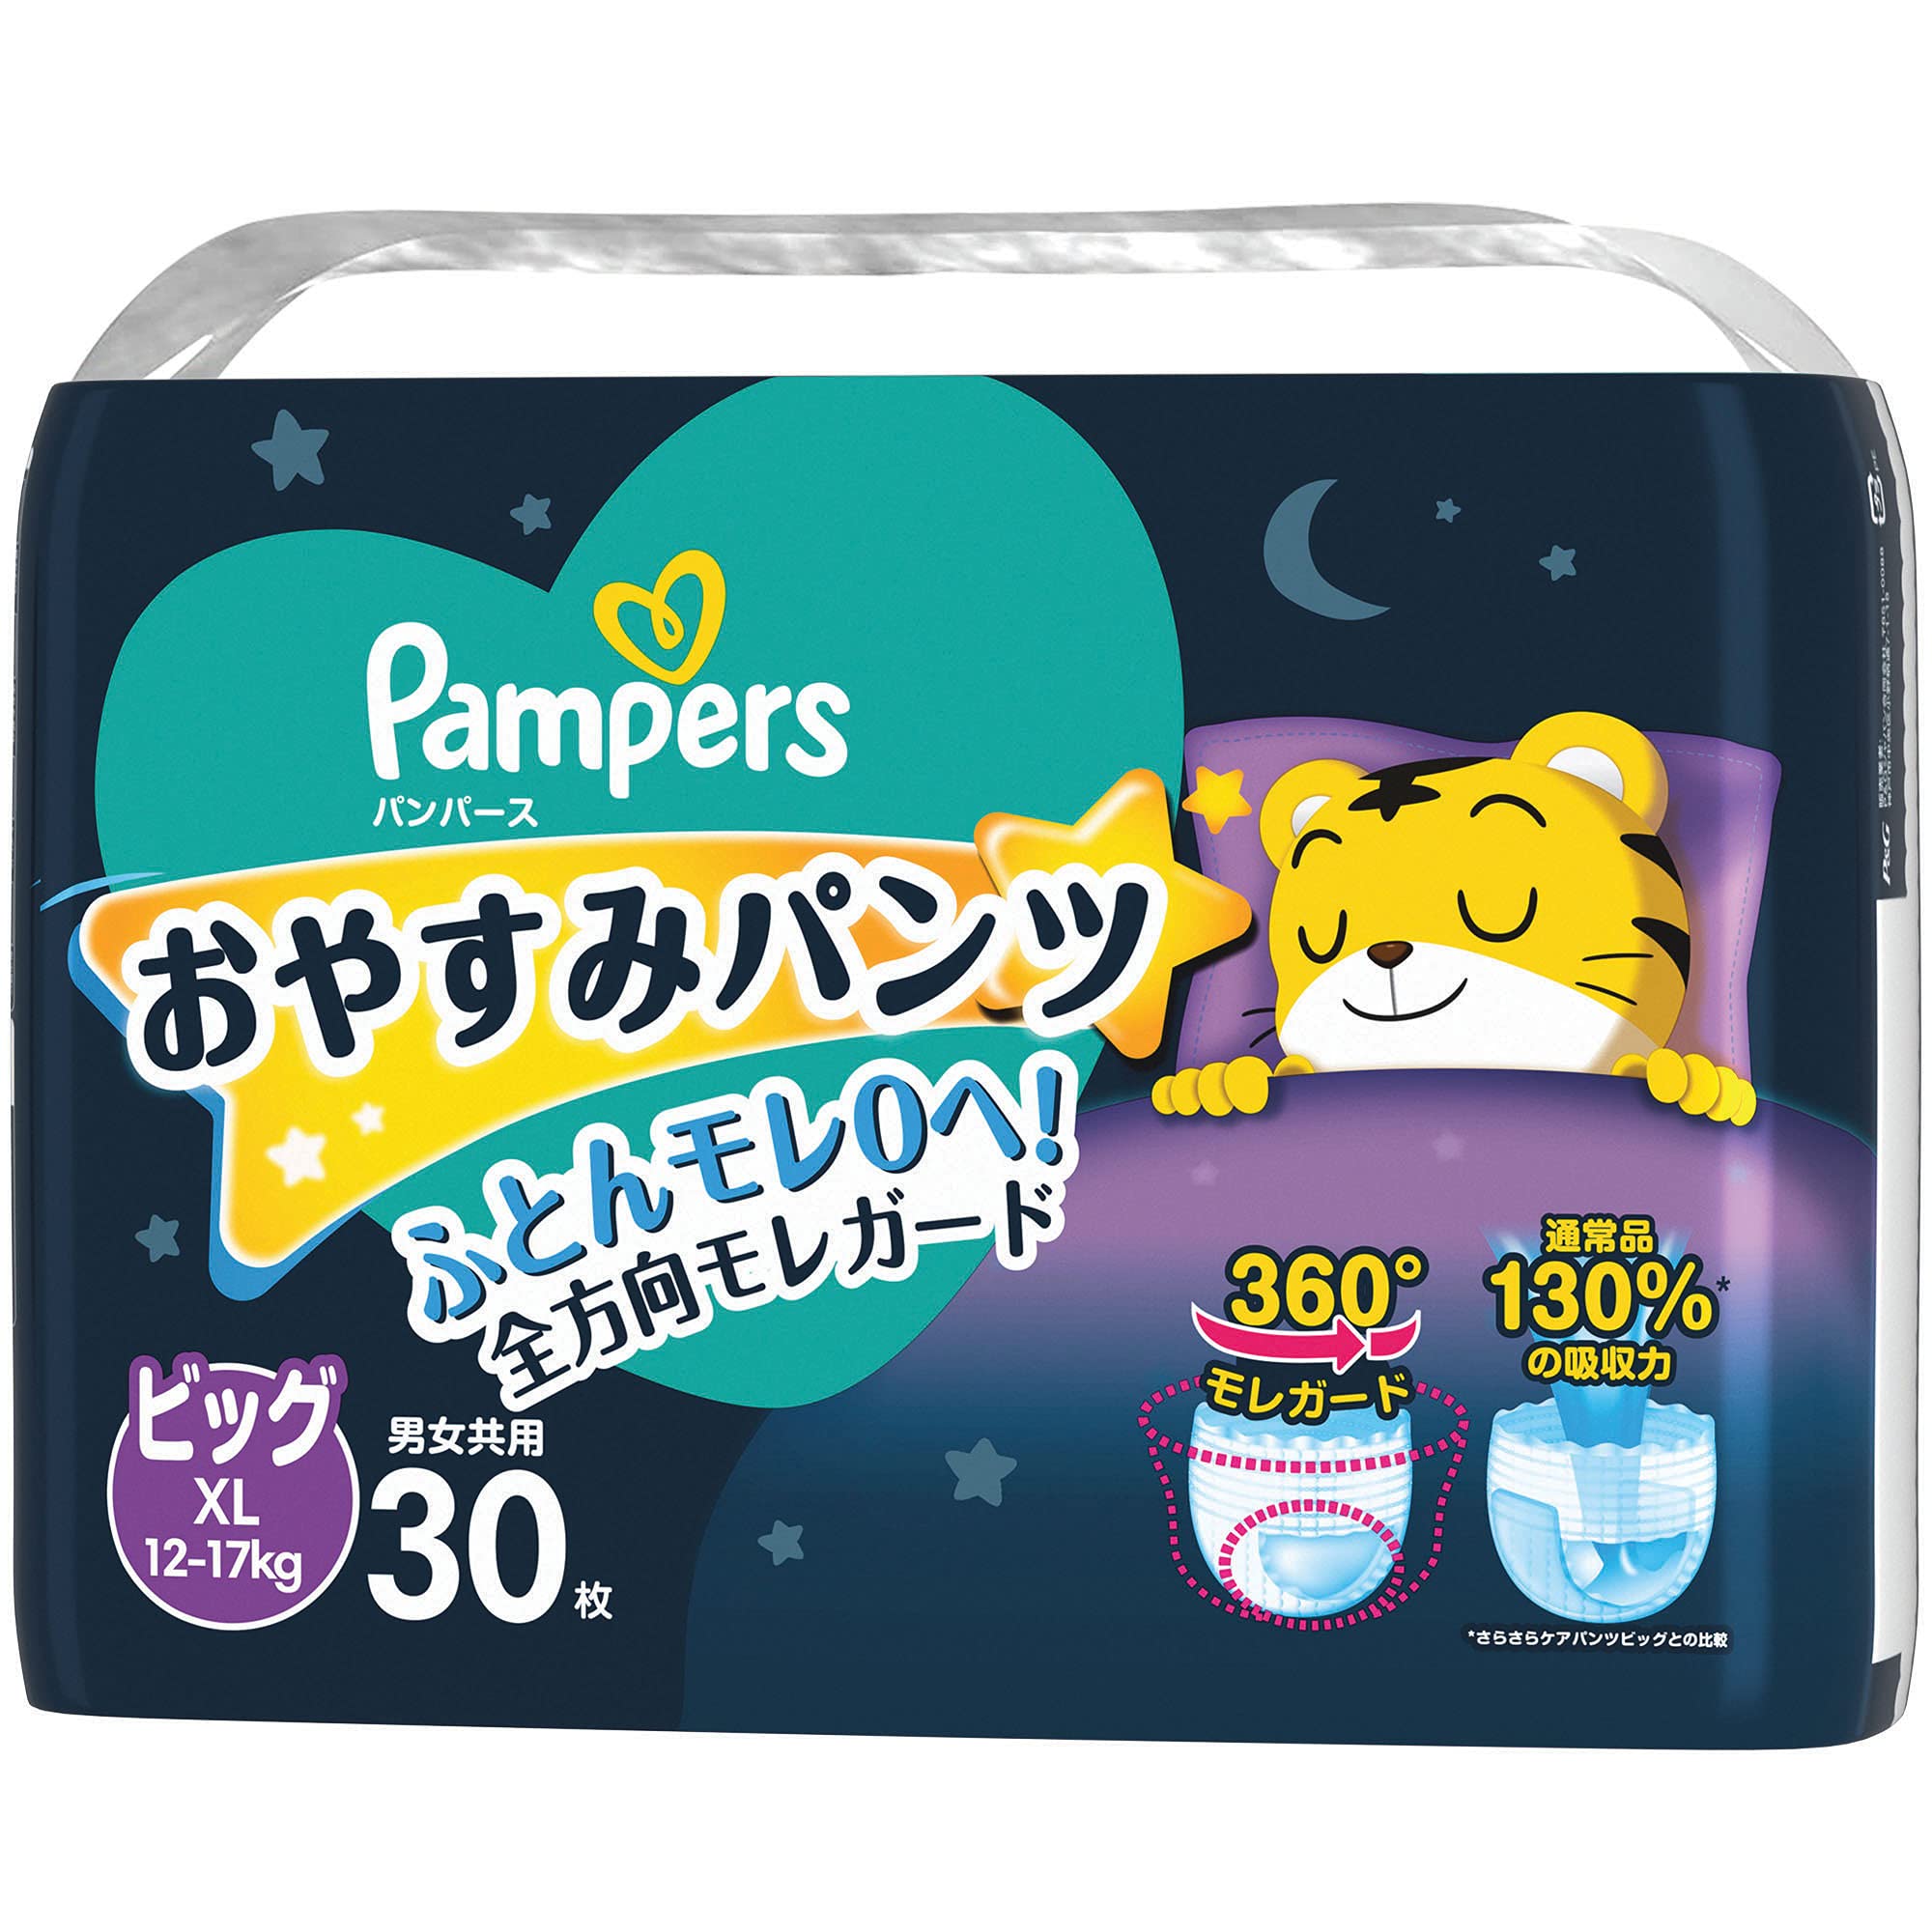 Buy XL Size Pampers diapers online in Nepal for Cheapest Price | Gifts to  Nepal | Giftmandu